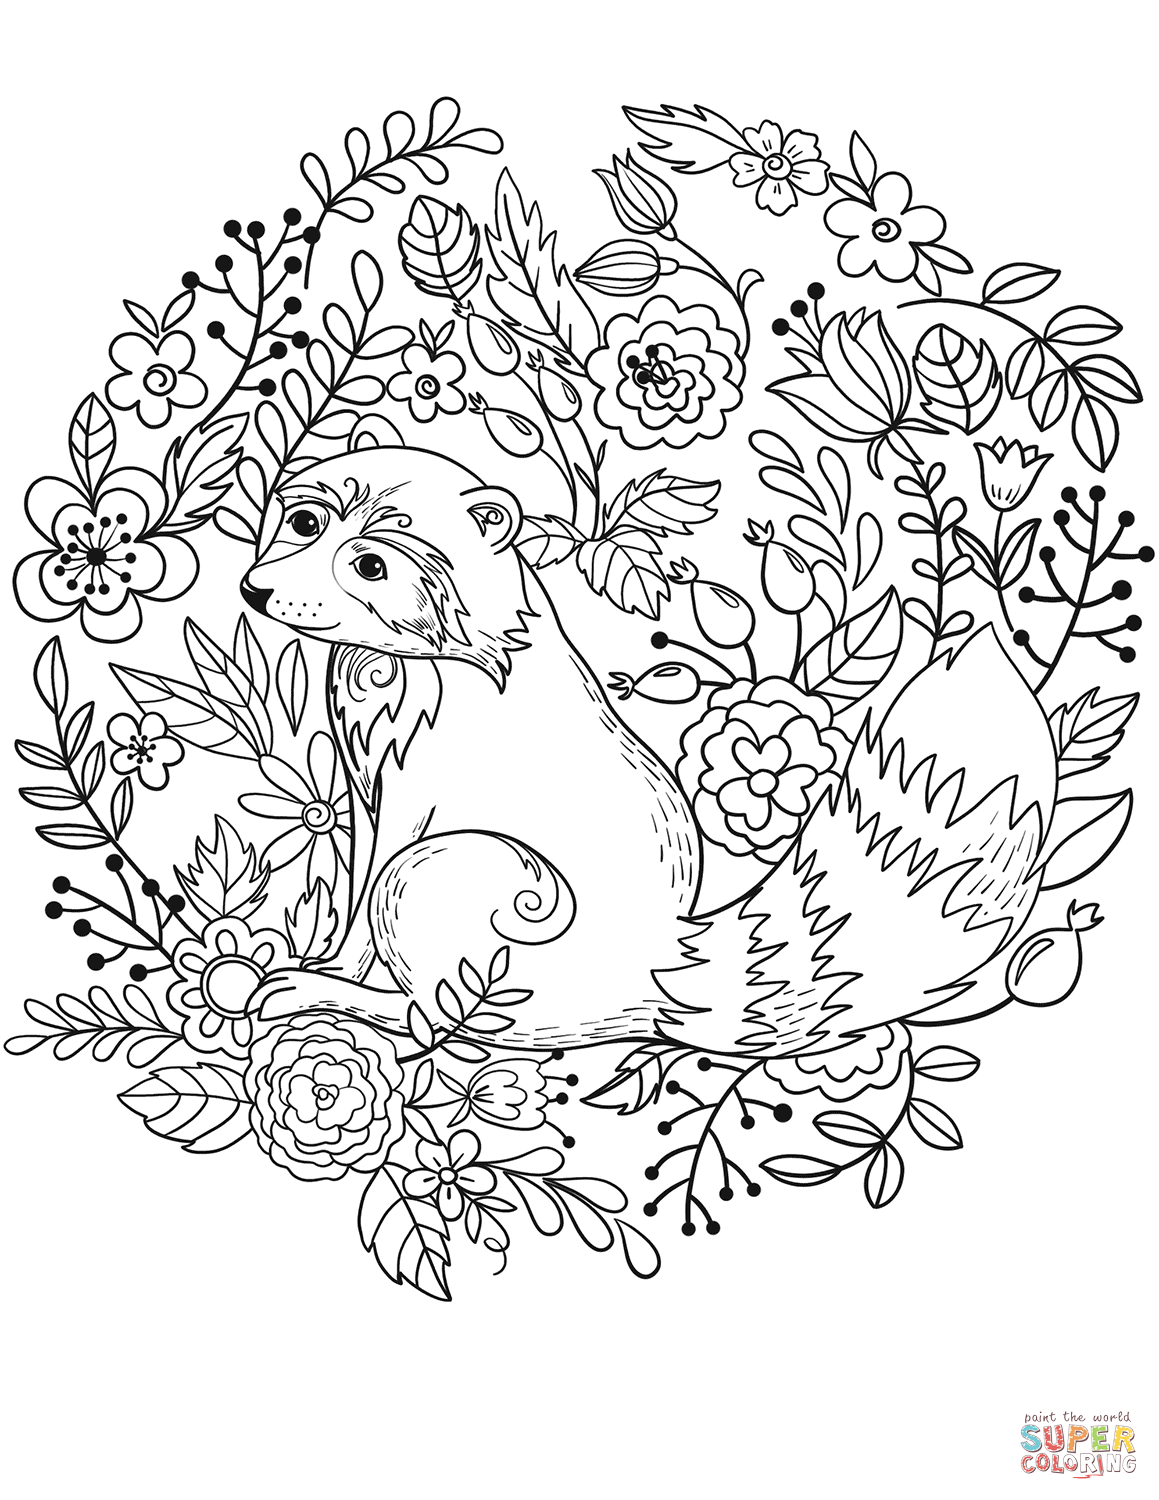 Raccoon coloring page free printable coloring pages